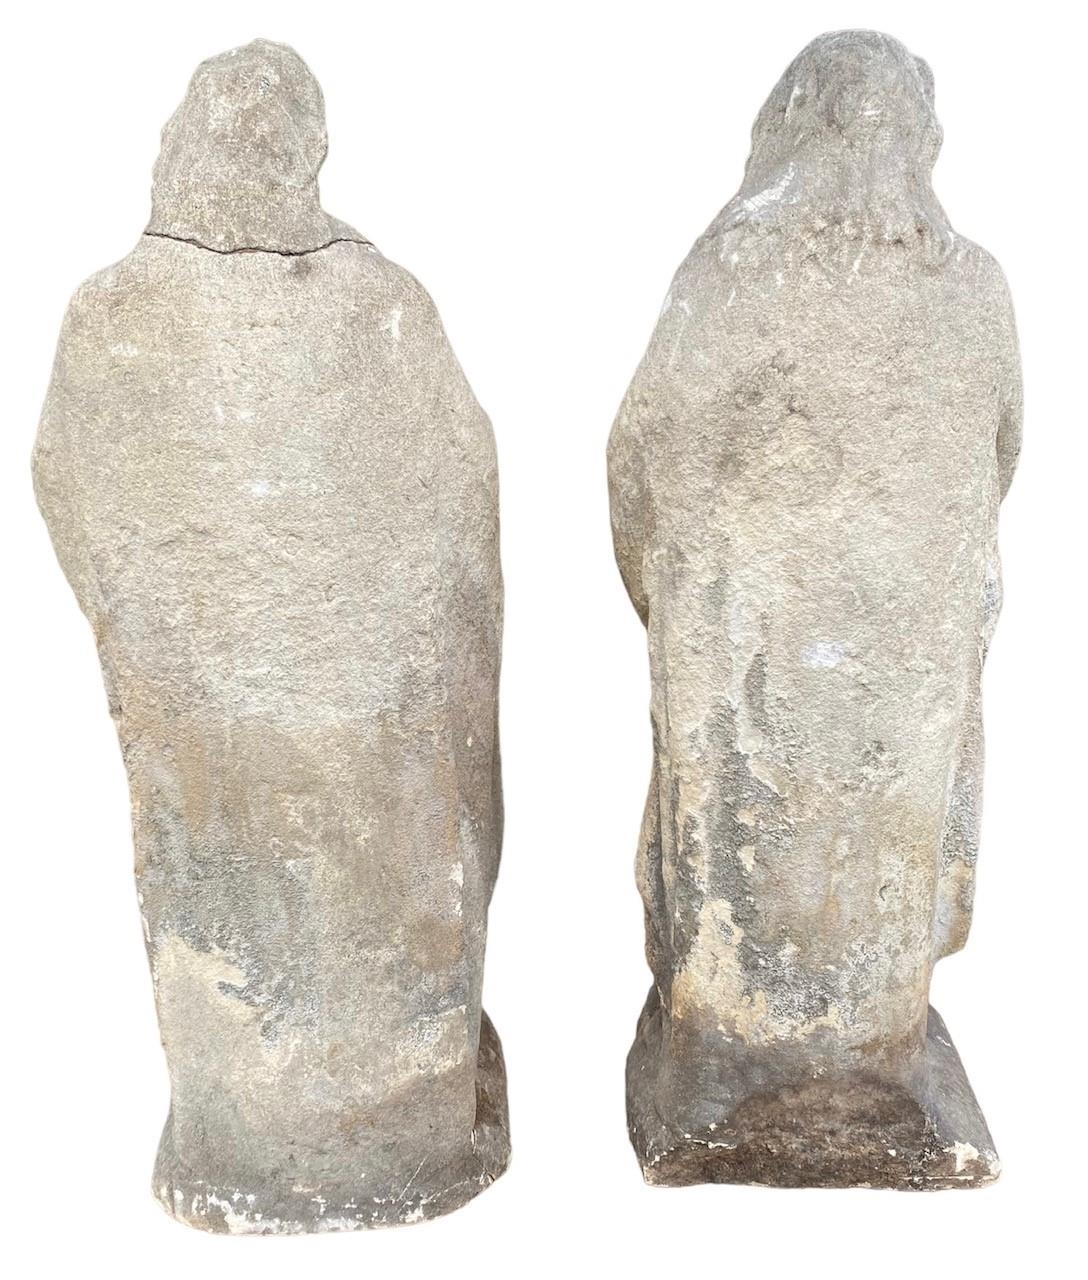 A PAIR OF 18TH CENTURY CARVED LIMESTONE FIGURES OF JOSEPH AND MARY. (h 71cm) - Image 3 of 4